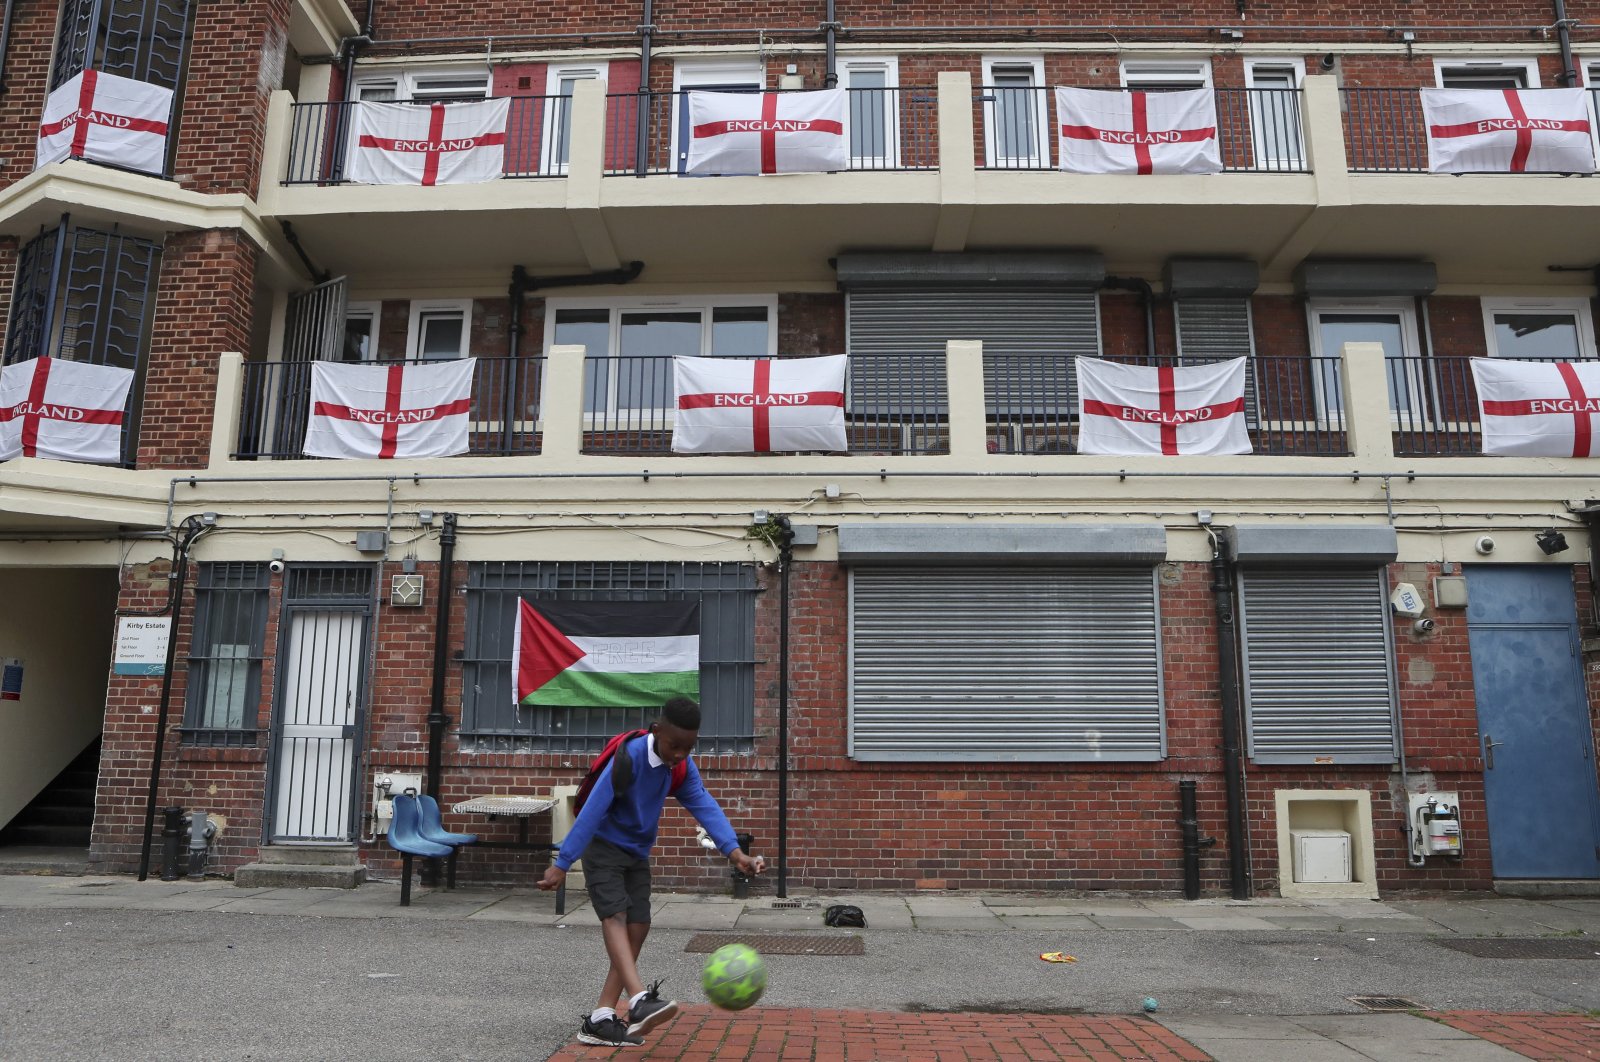 A boy kicks a football in front of the balconies and landings adorned with predominantly England flags at the Kirby housing estate in London, England, June 29, 2021. (AP Photo)